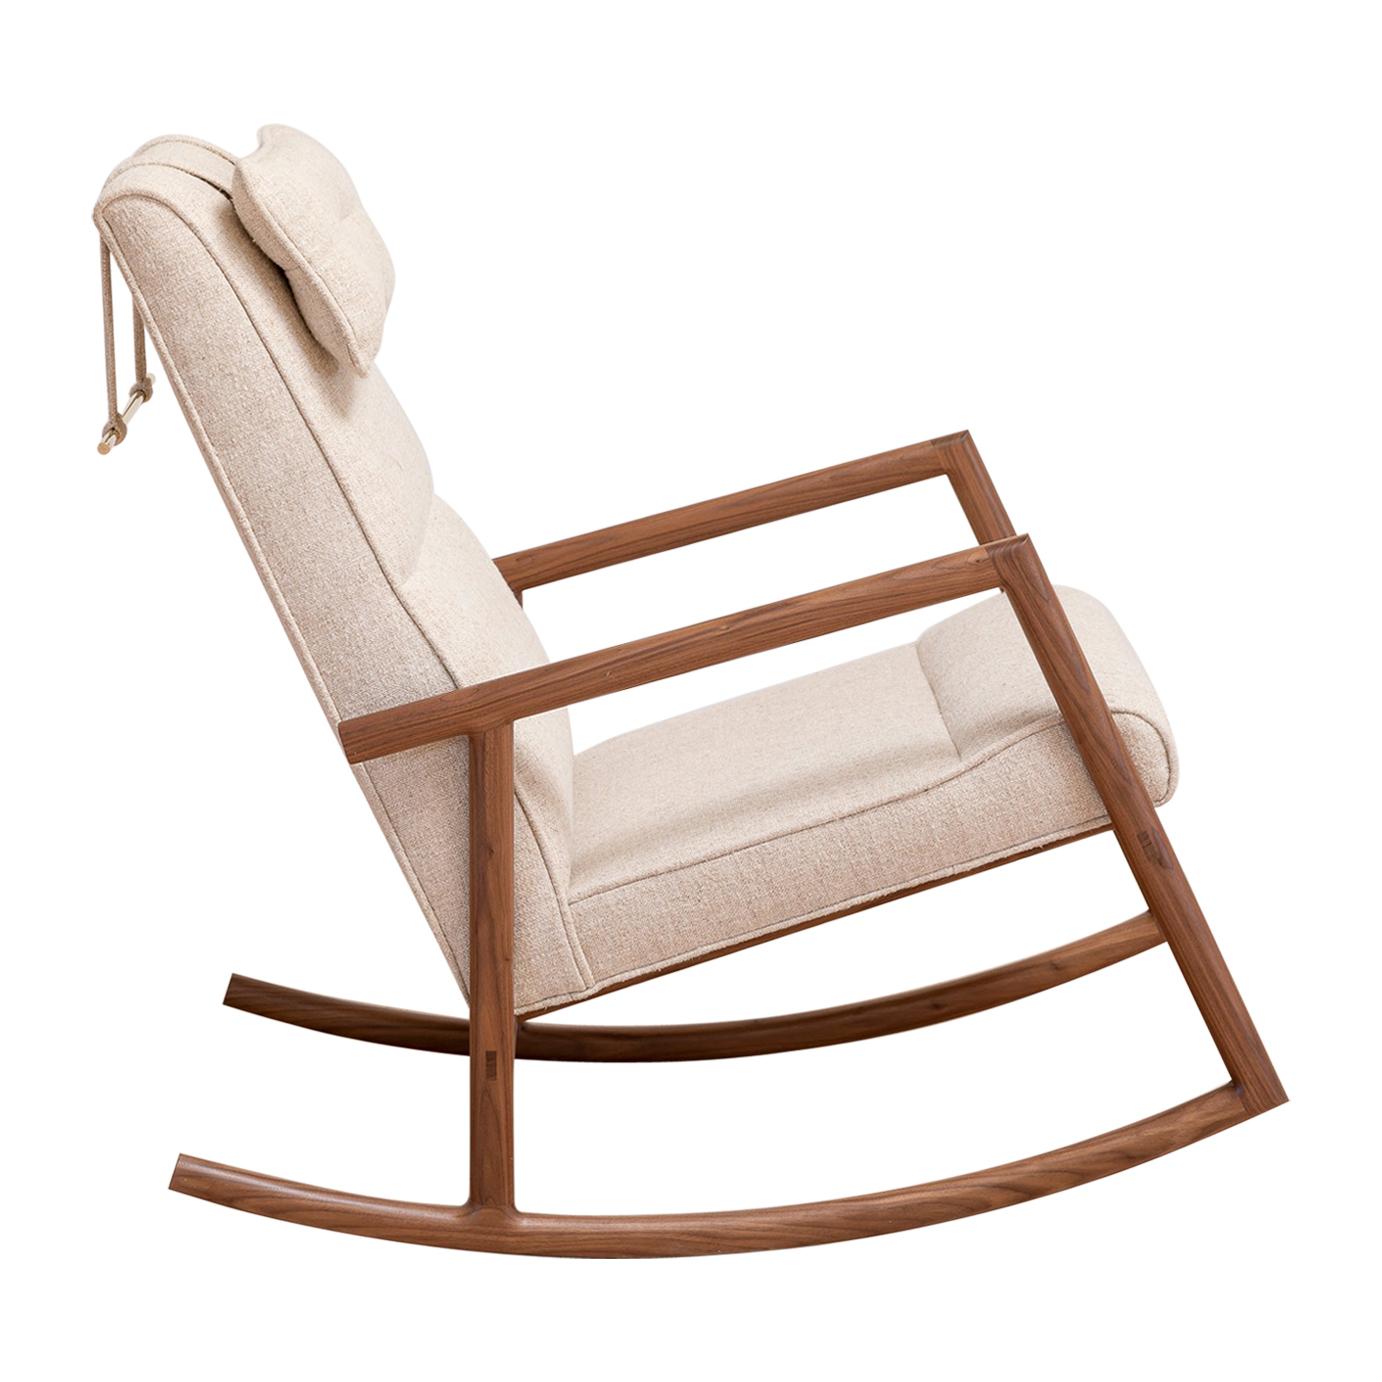 Earl Walnut, Beige Textured Linen Moresby Rocking Chair For Sale